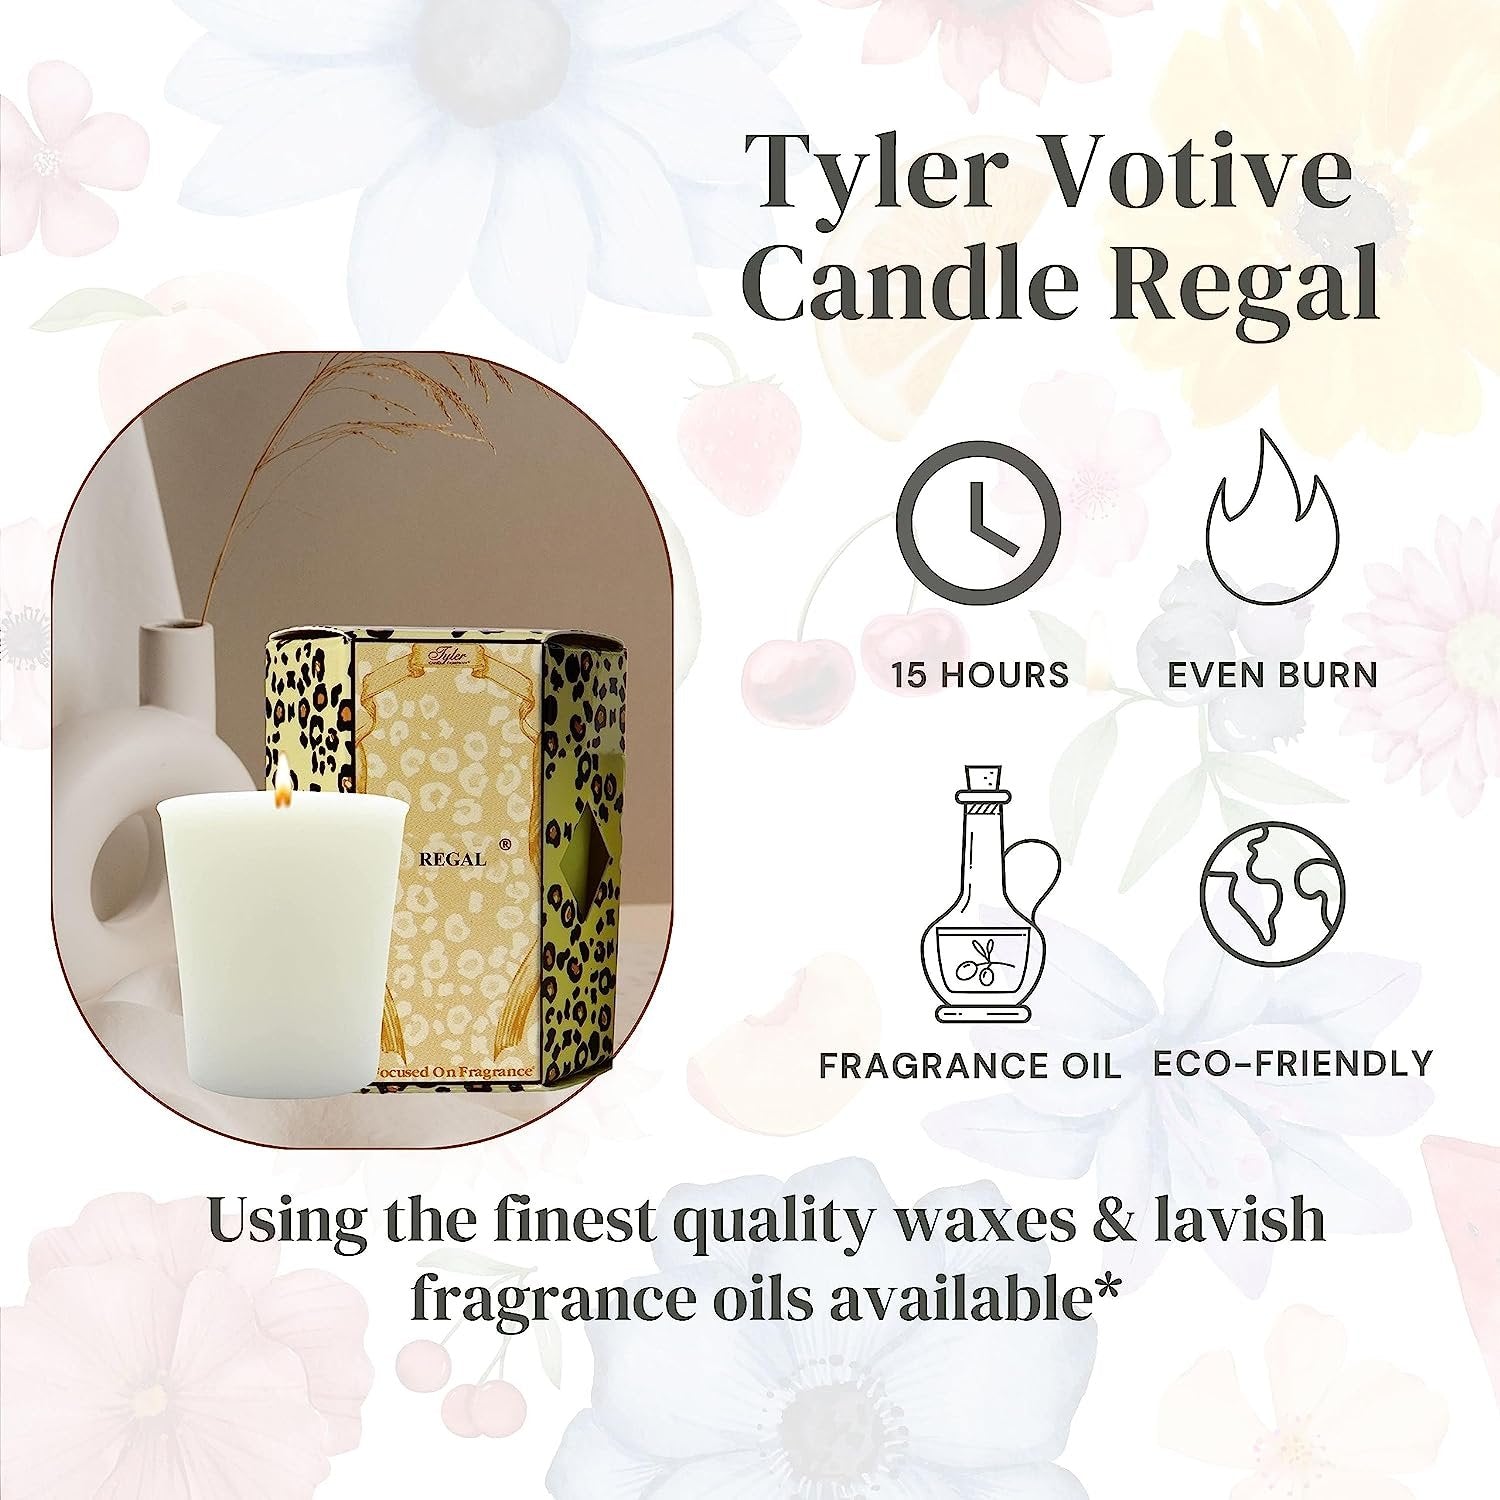 Tyler Candle Company Regal Votive Candles - Luxury Scented Candle with Essential Oils - 4 Pack of 2 oz Small Candles with 15 Hour Burn Time Each - with Bonus Key Chain